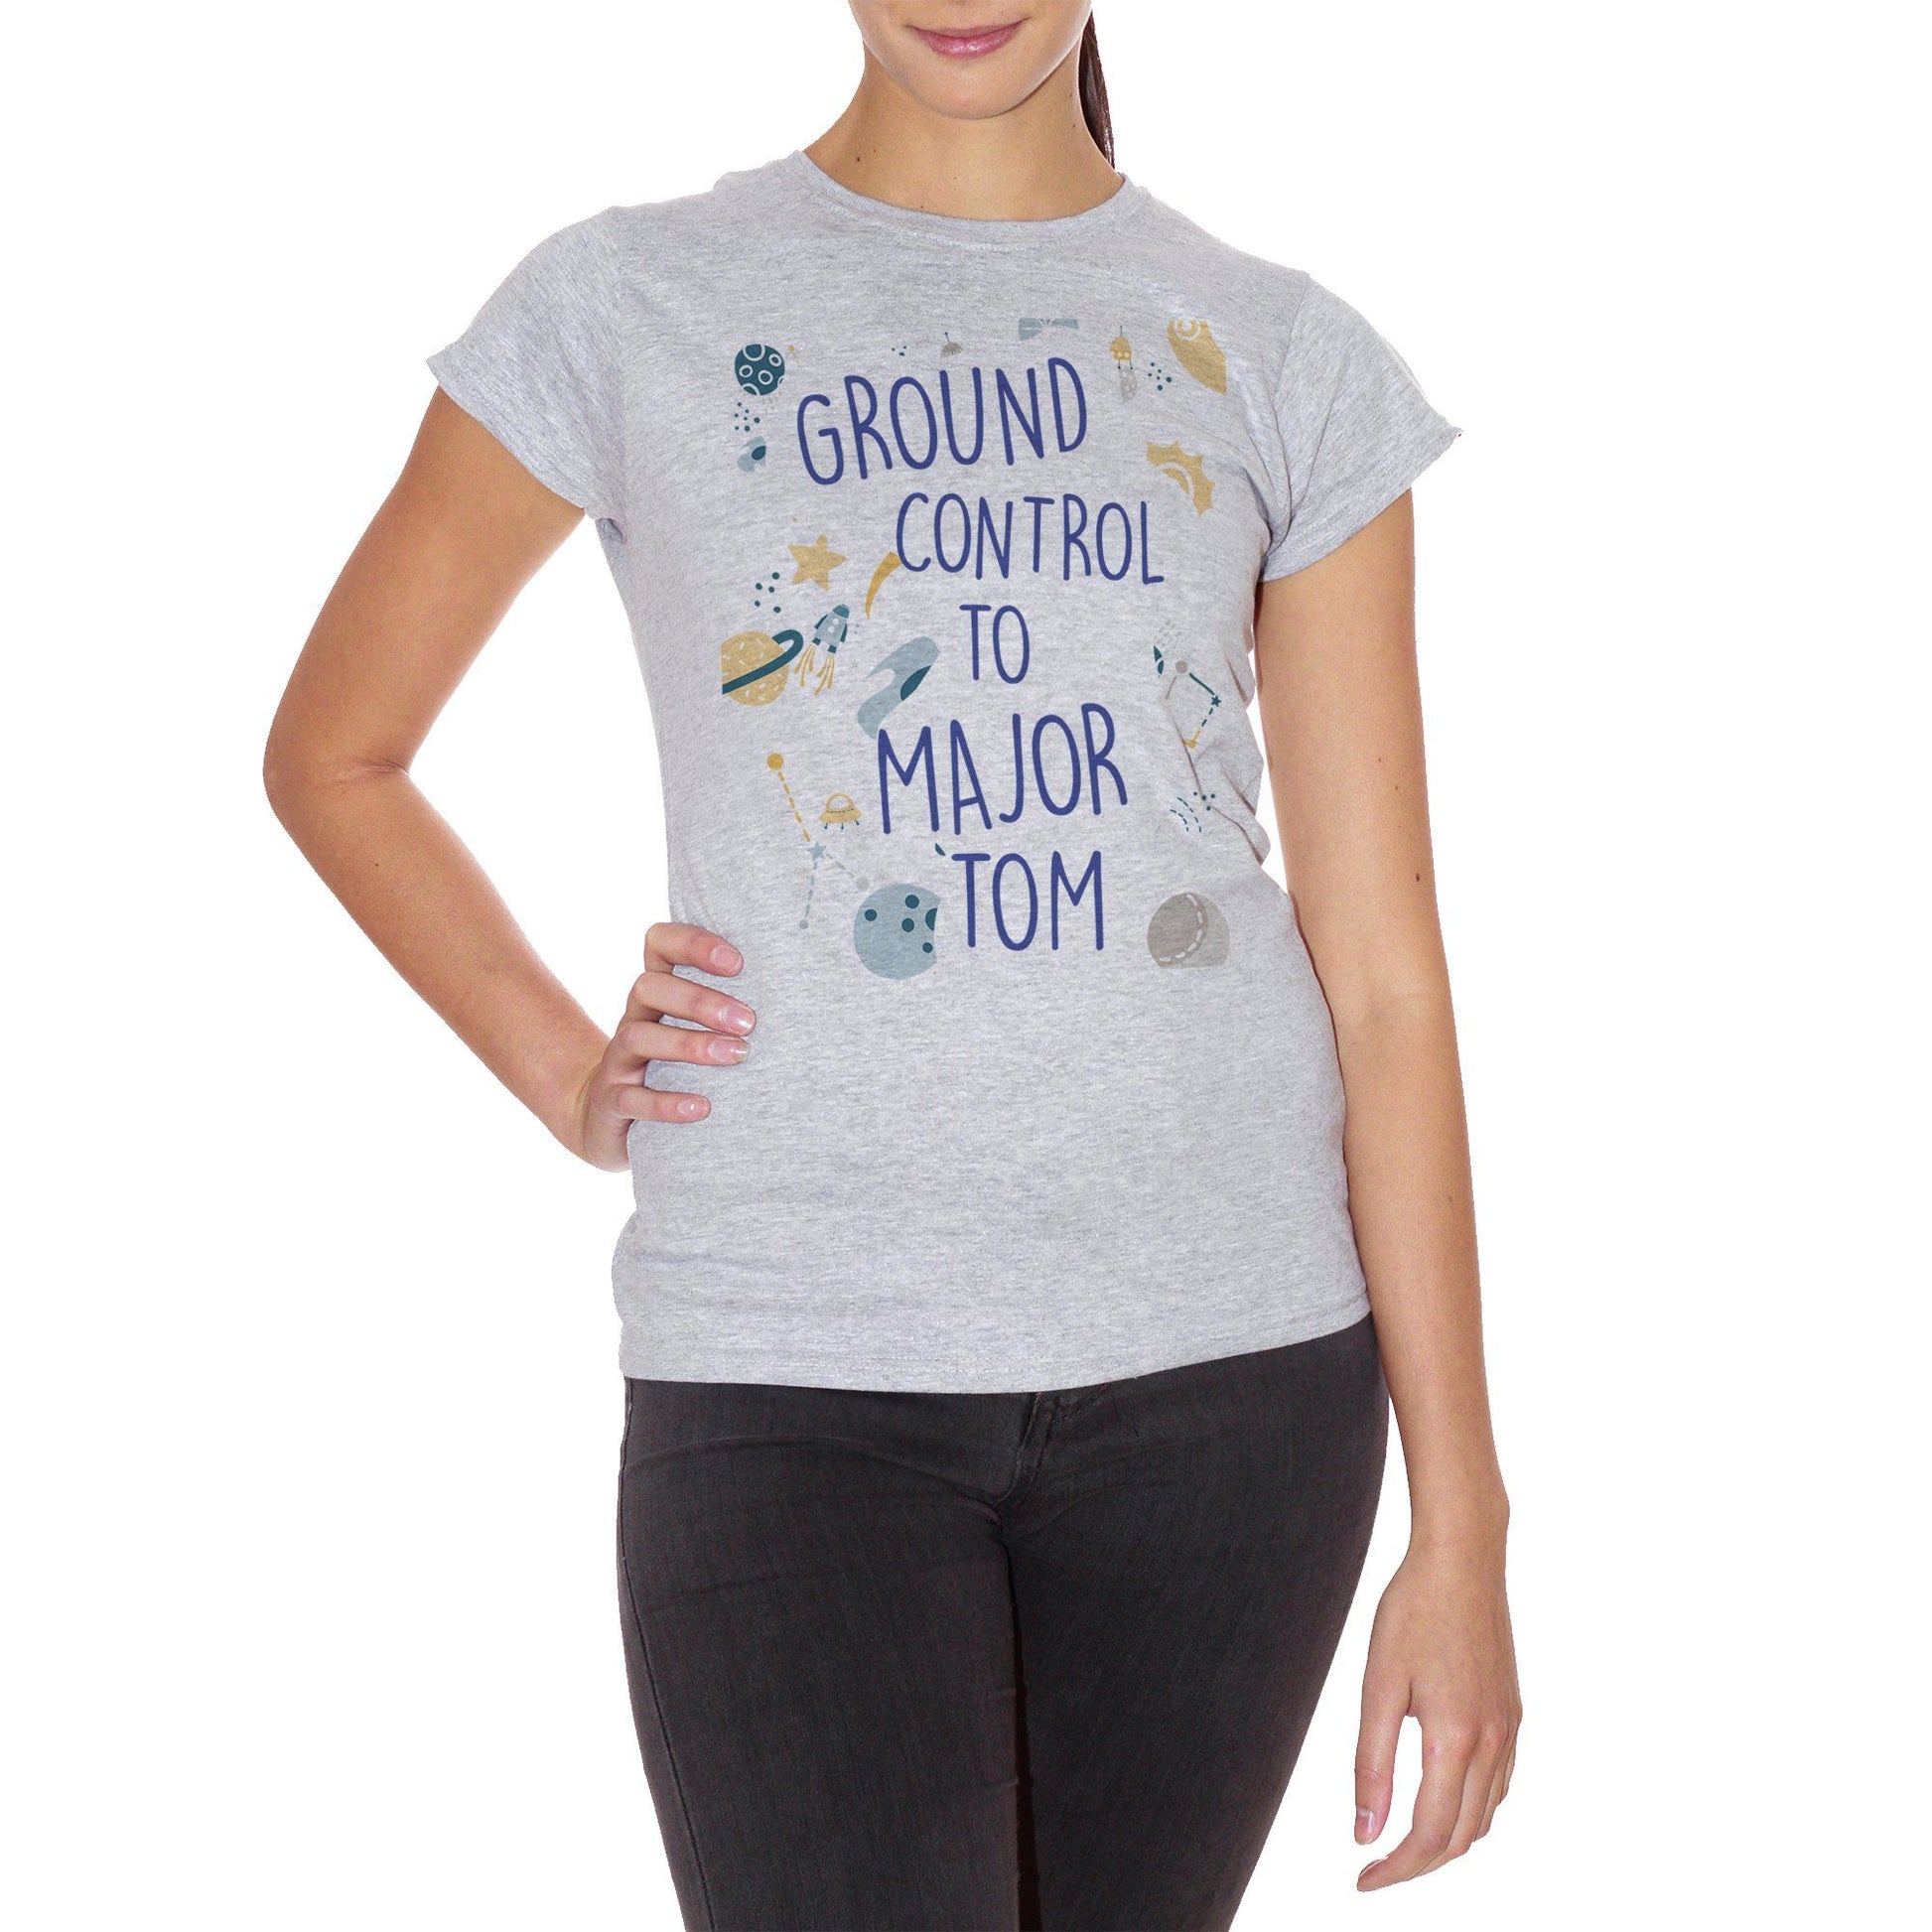 Light Gray T-Shirt Ground Control To Major Tom David Bowie-Space Oddity Song Canzone - MUSIC CucShop